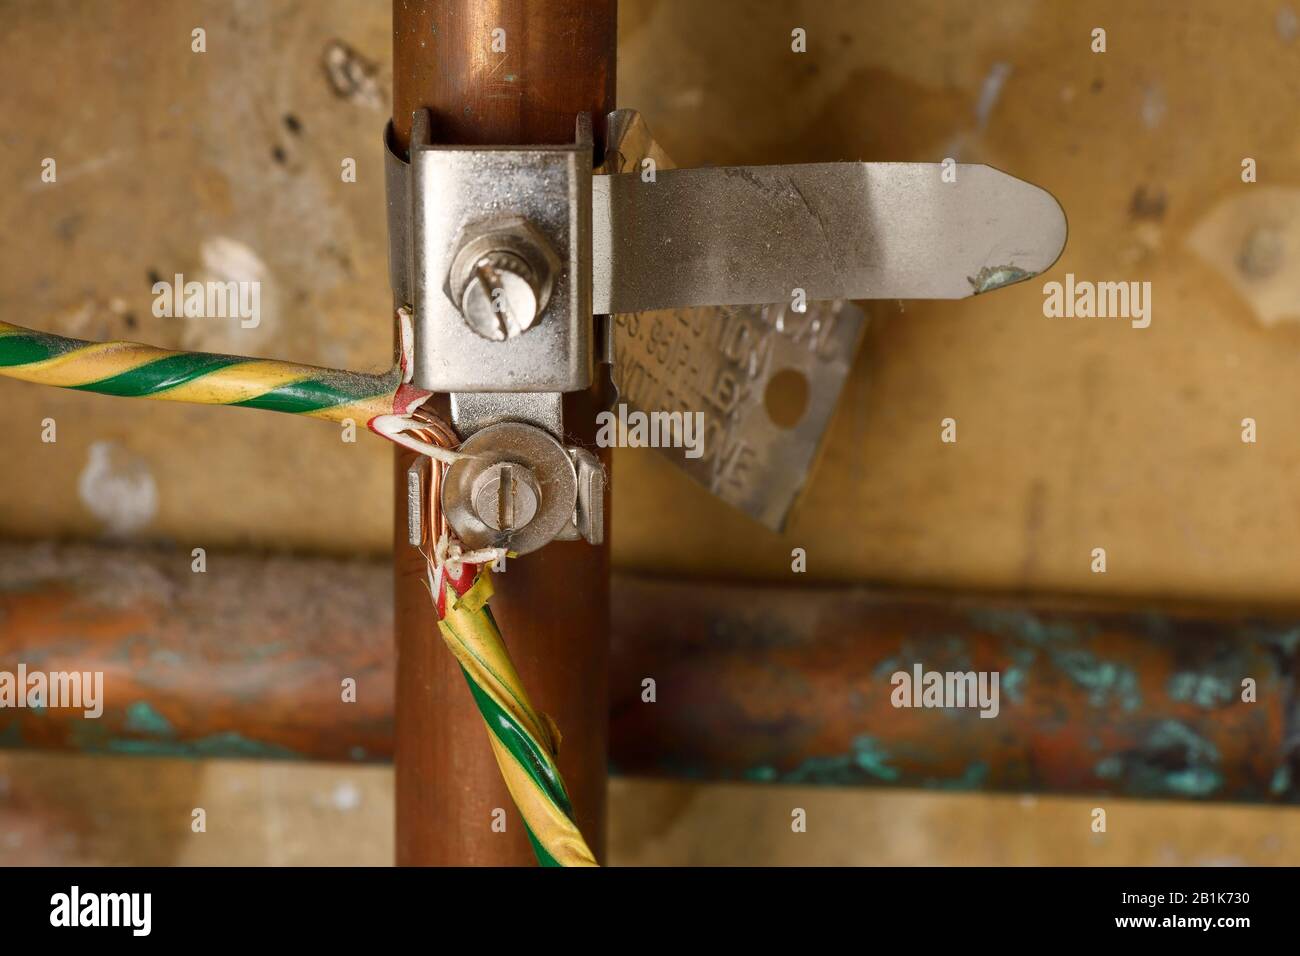 An electrical earth bonding strap on a domestic copper pipe Stock Photo